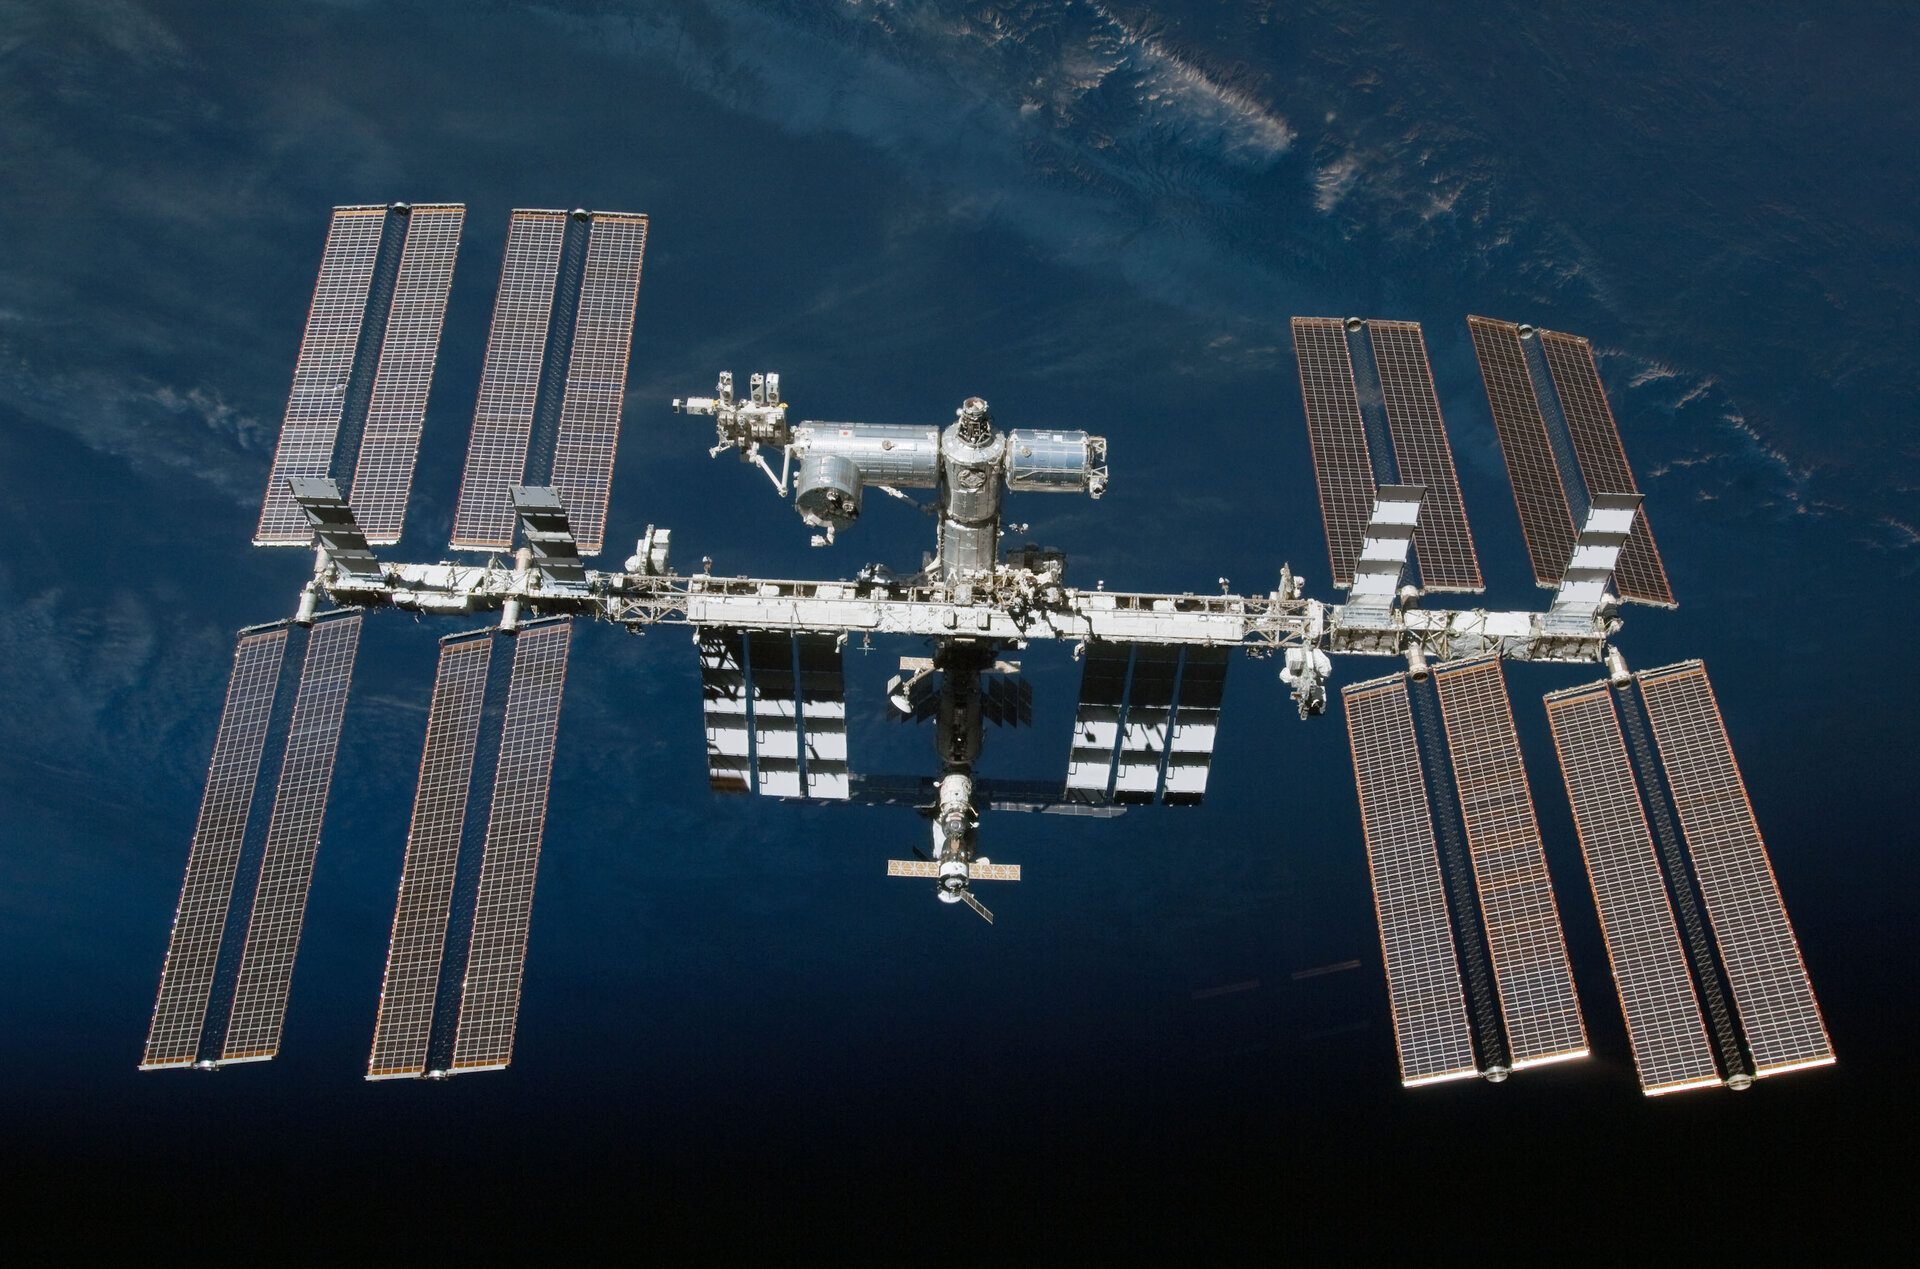 ISS photographed by an STS-130 crew member